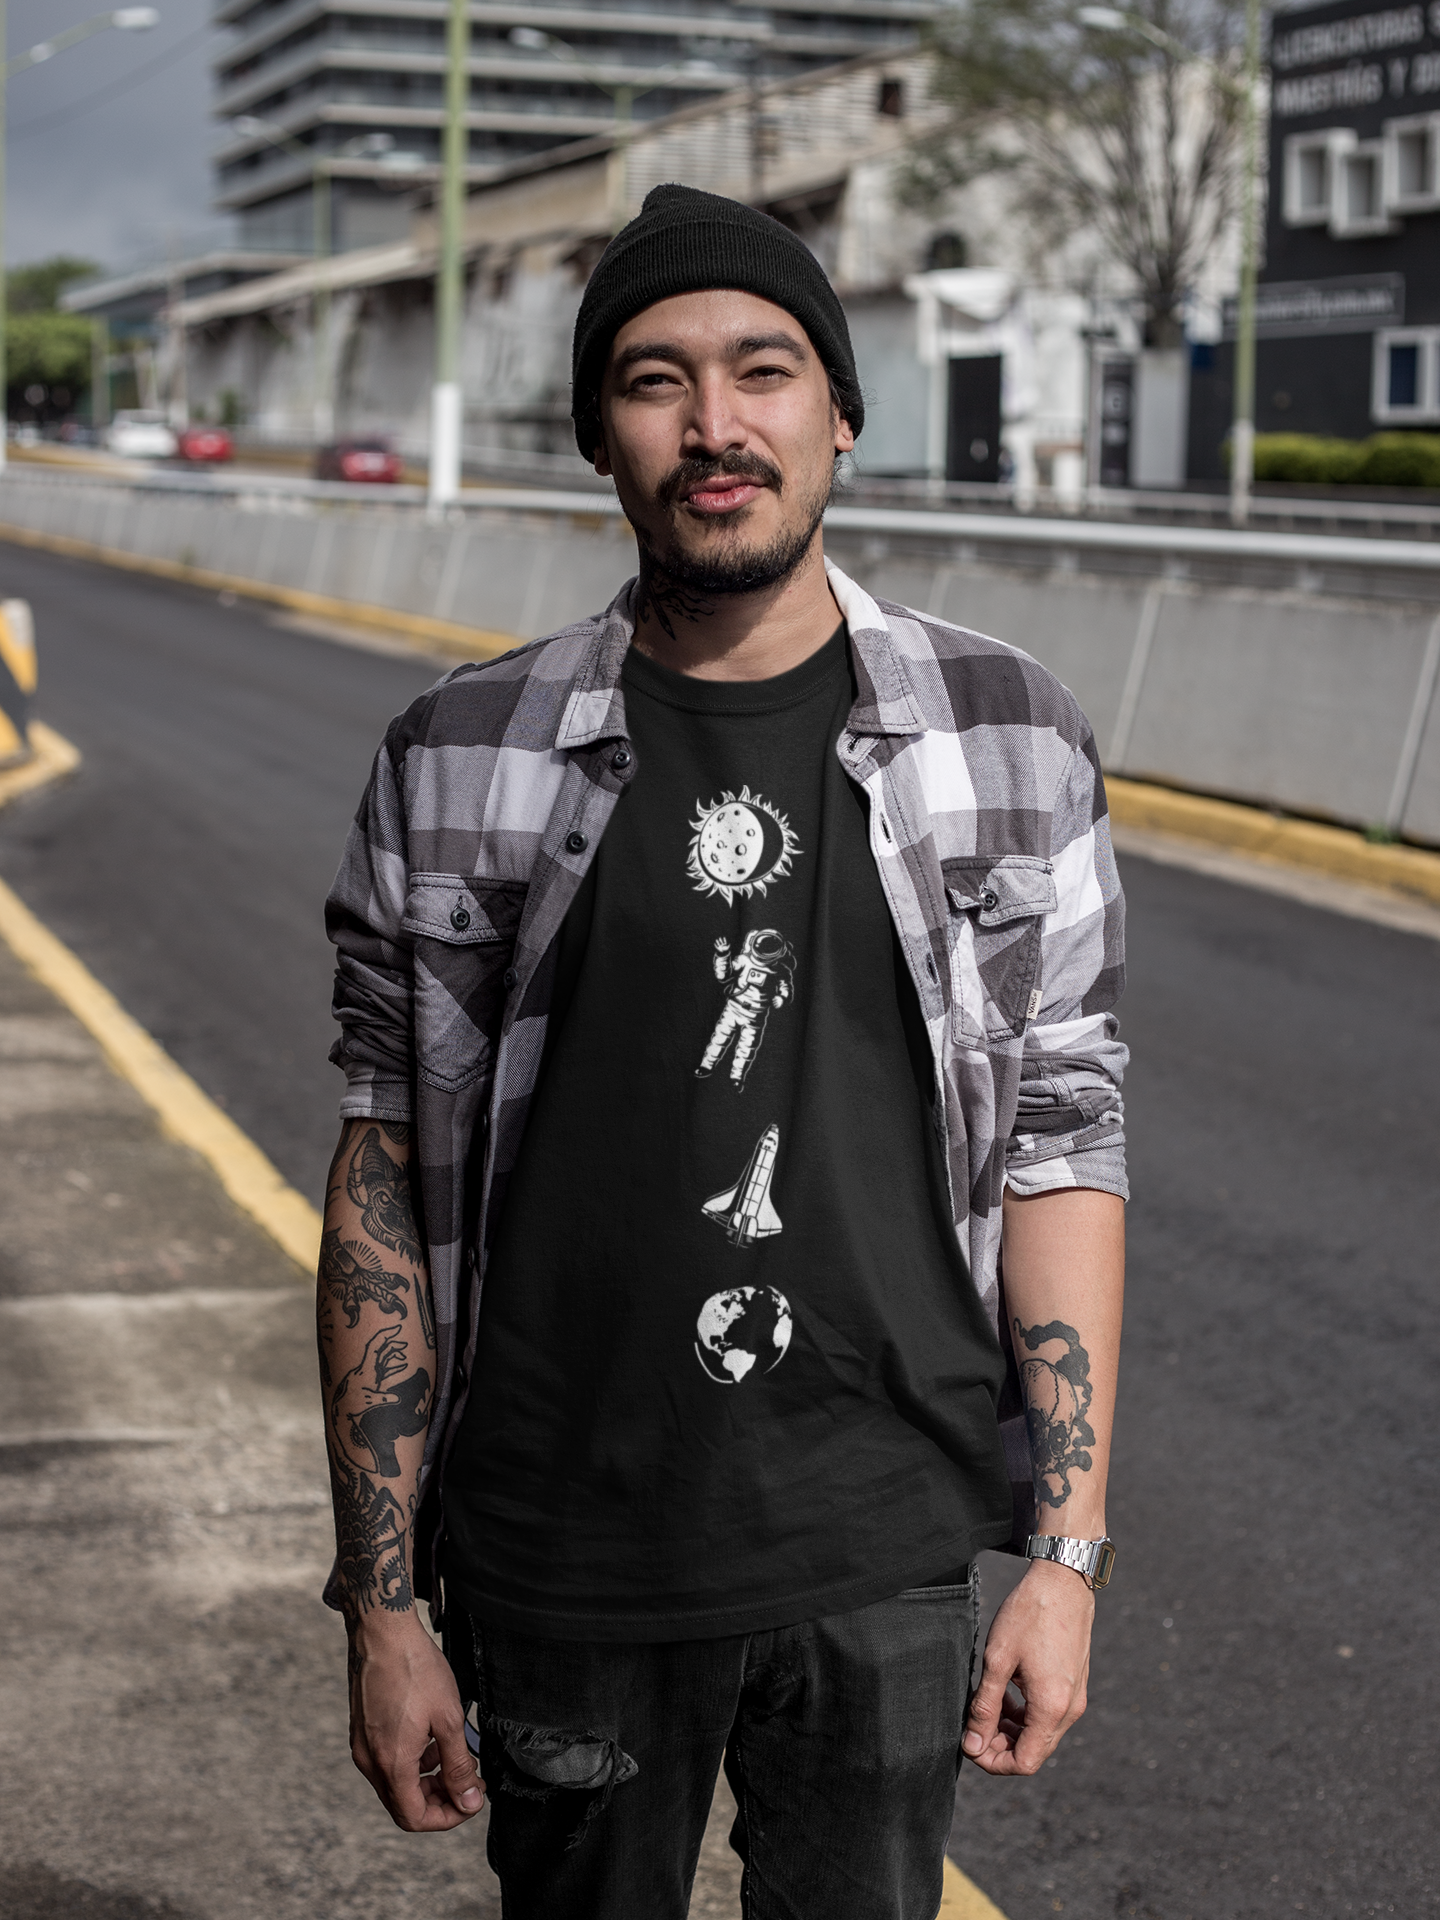 tattooed-asian-man-with-attitude-walking-alongside-the-road-wearing-a-t-shirt-mockup-a17068.png